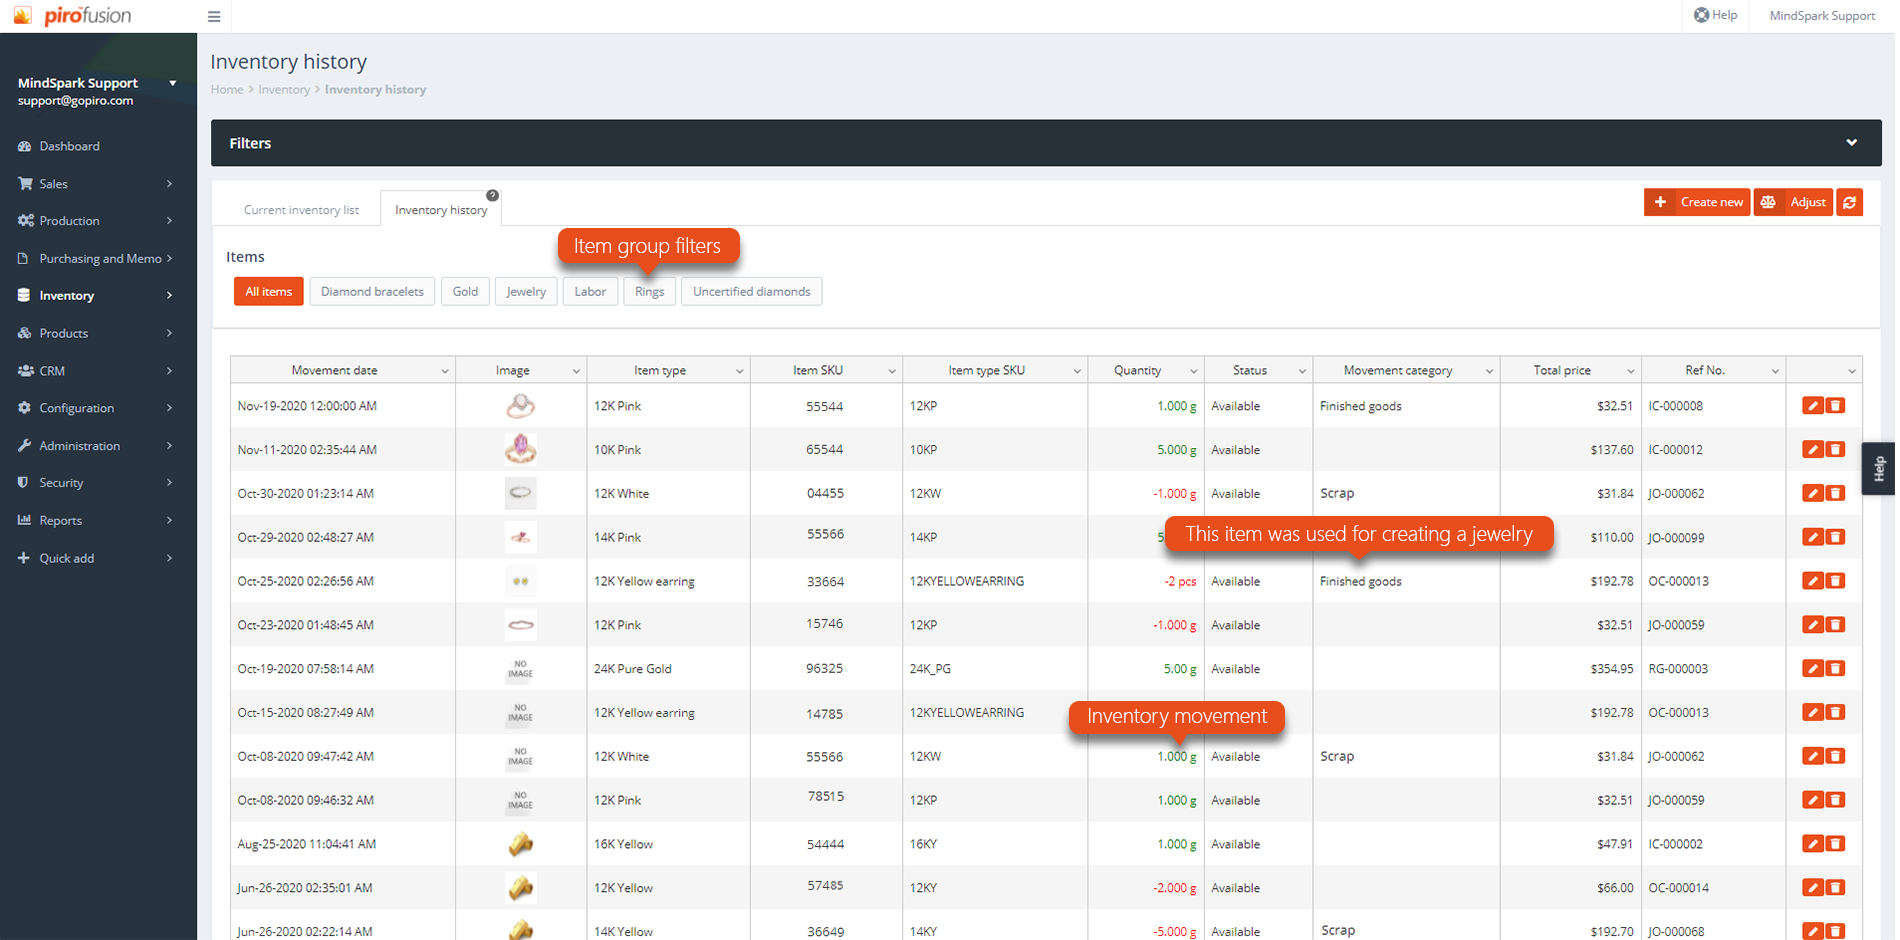 PIRO is tracking in real-time your inventory movements, so you always know what you have on stock.